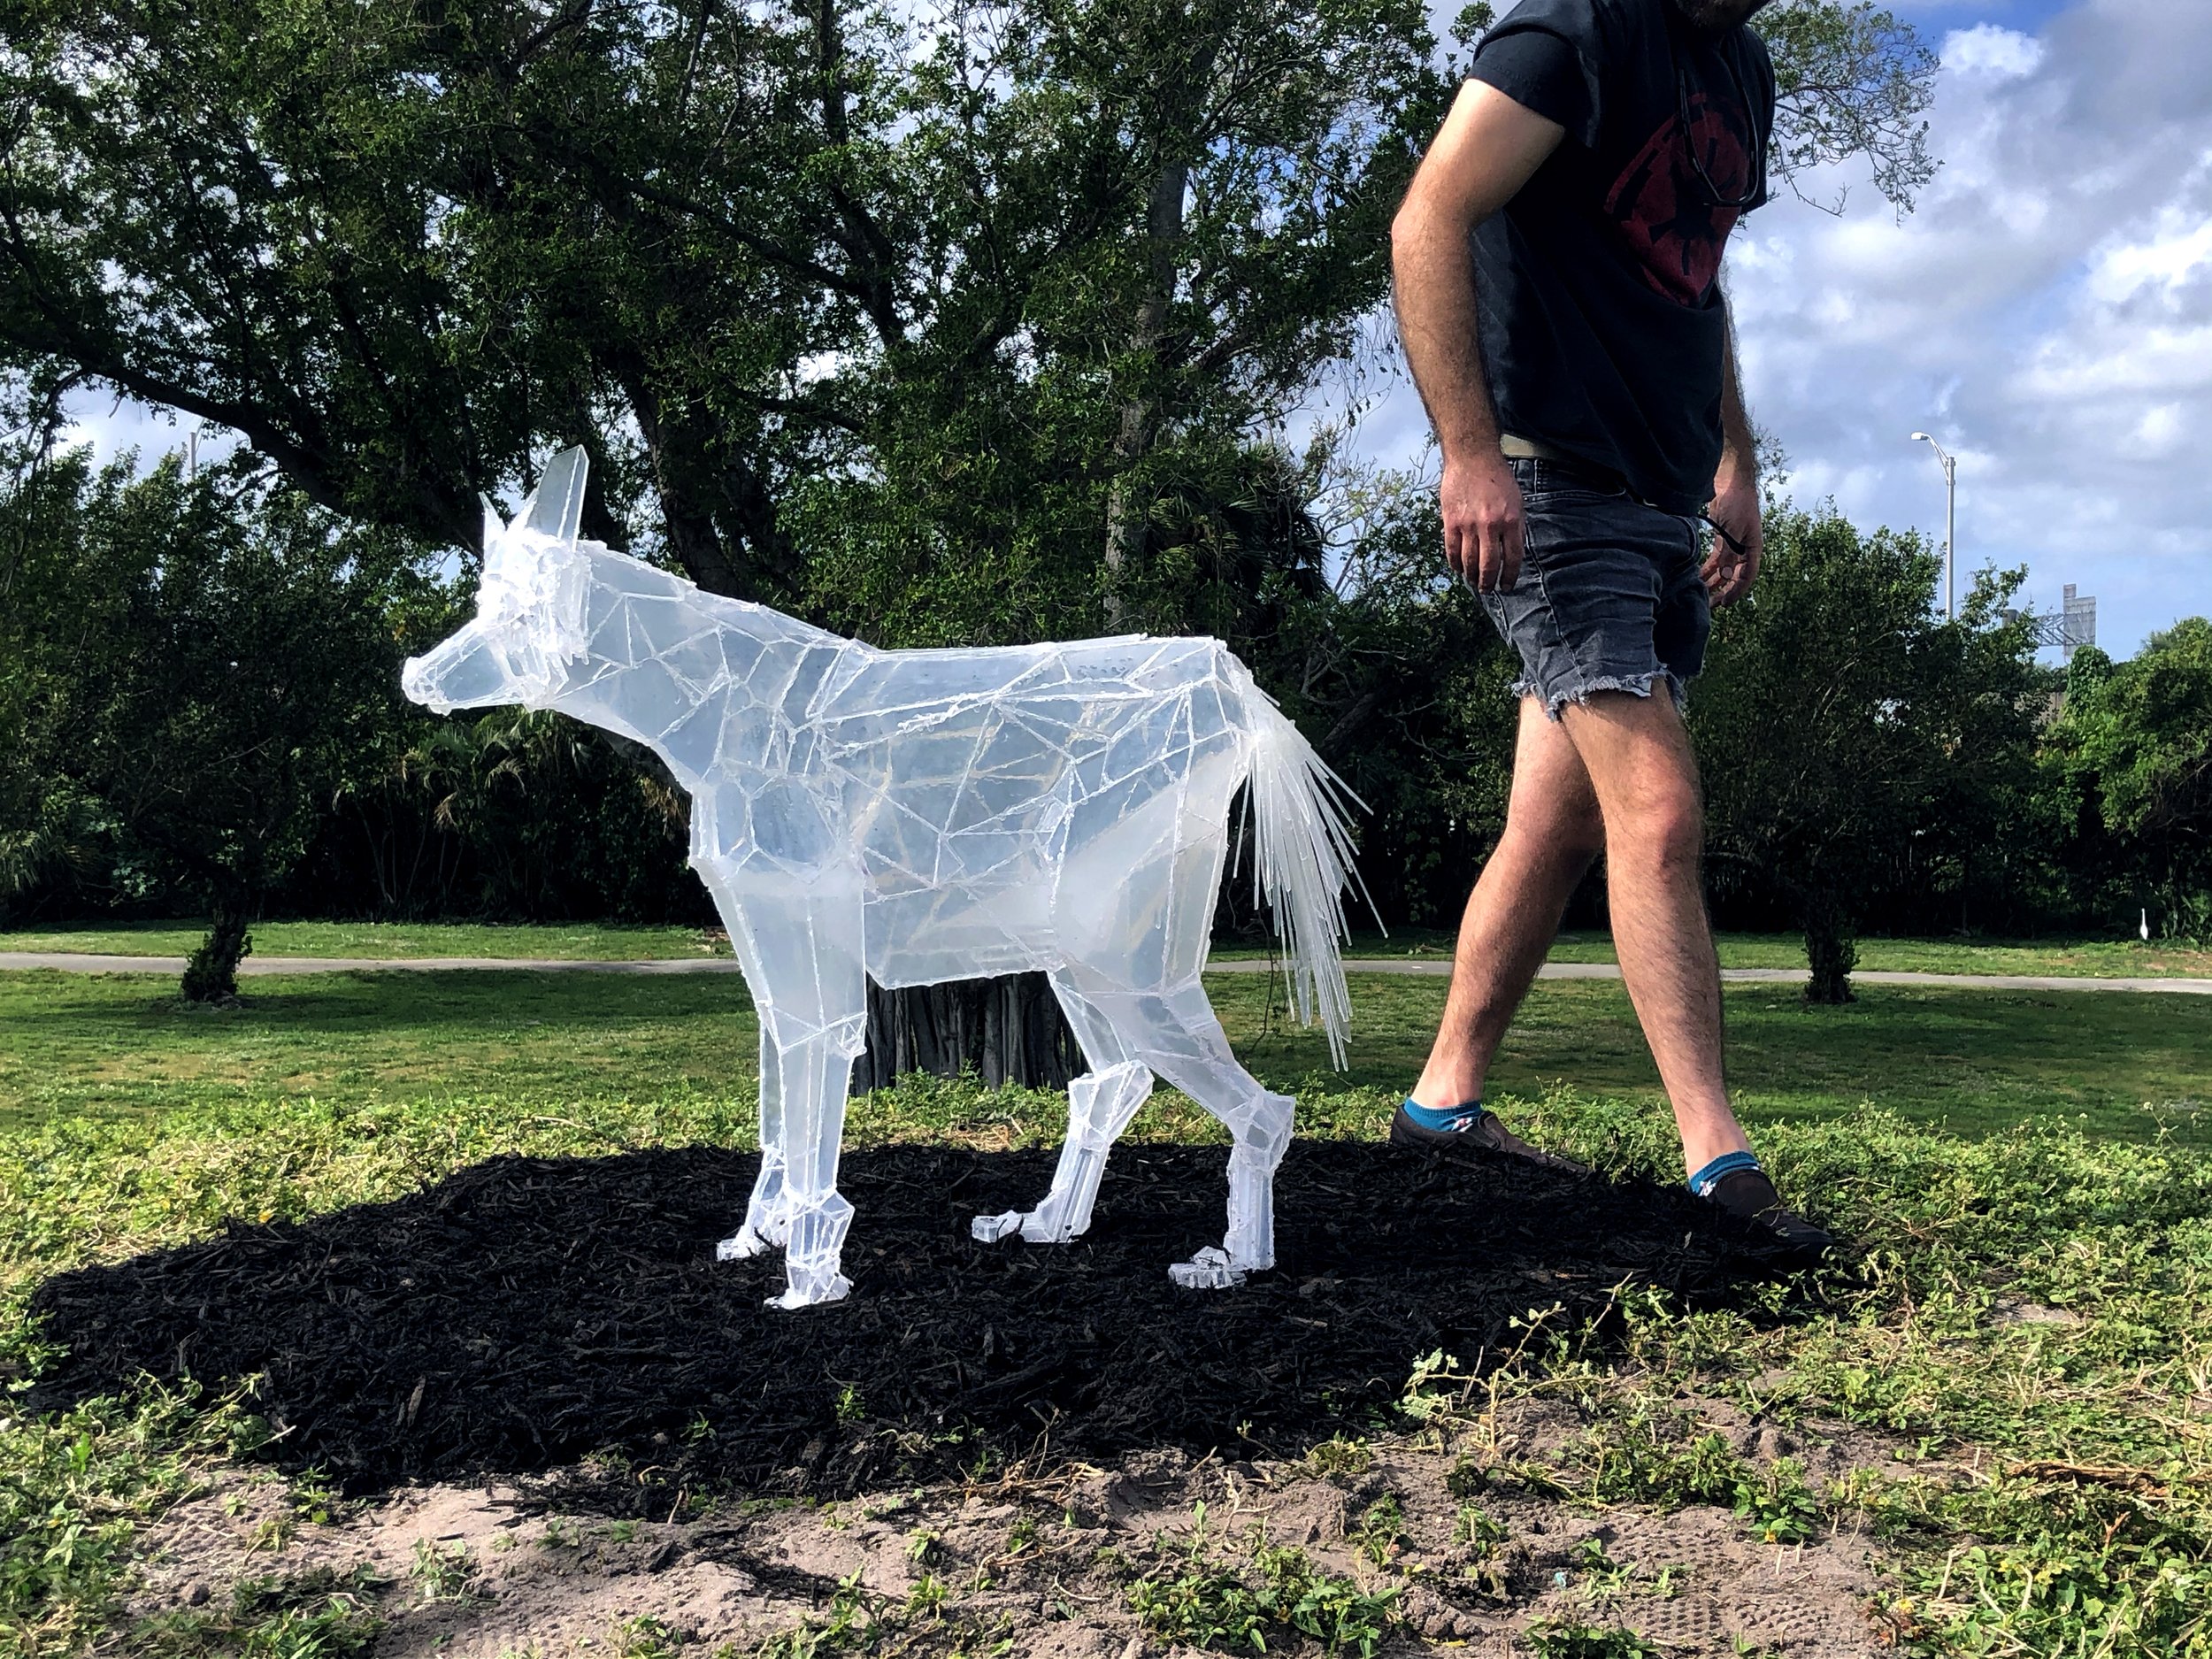   Coyote  plexiglass, resin. 2021   part of    Spirits of South Florida    three sculptures commissioned by The City of West Palm Beach for The Commons : 15 Artists 15 Spaces. Dreher Park and The Palm Beach Zoo, West Palm Beach, FL, 33405. 2021   